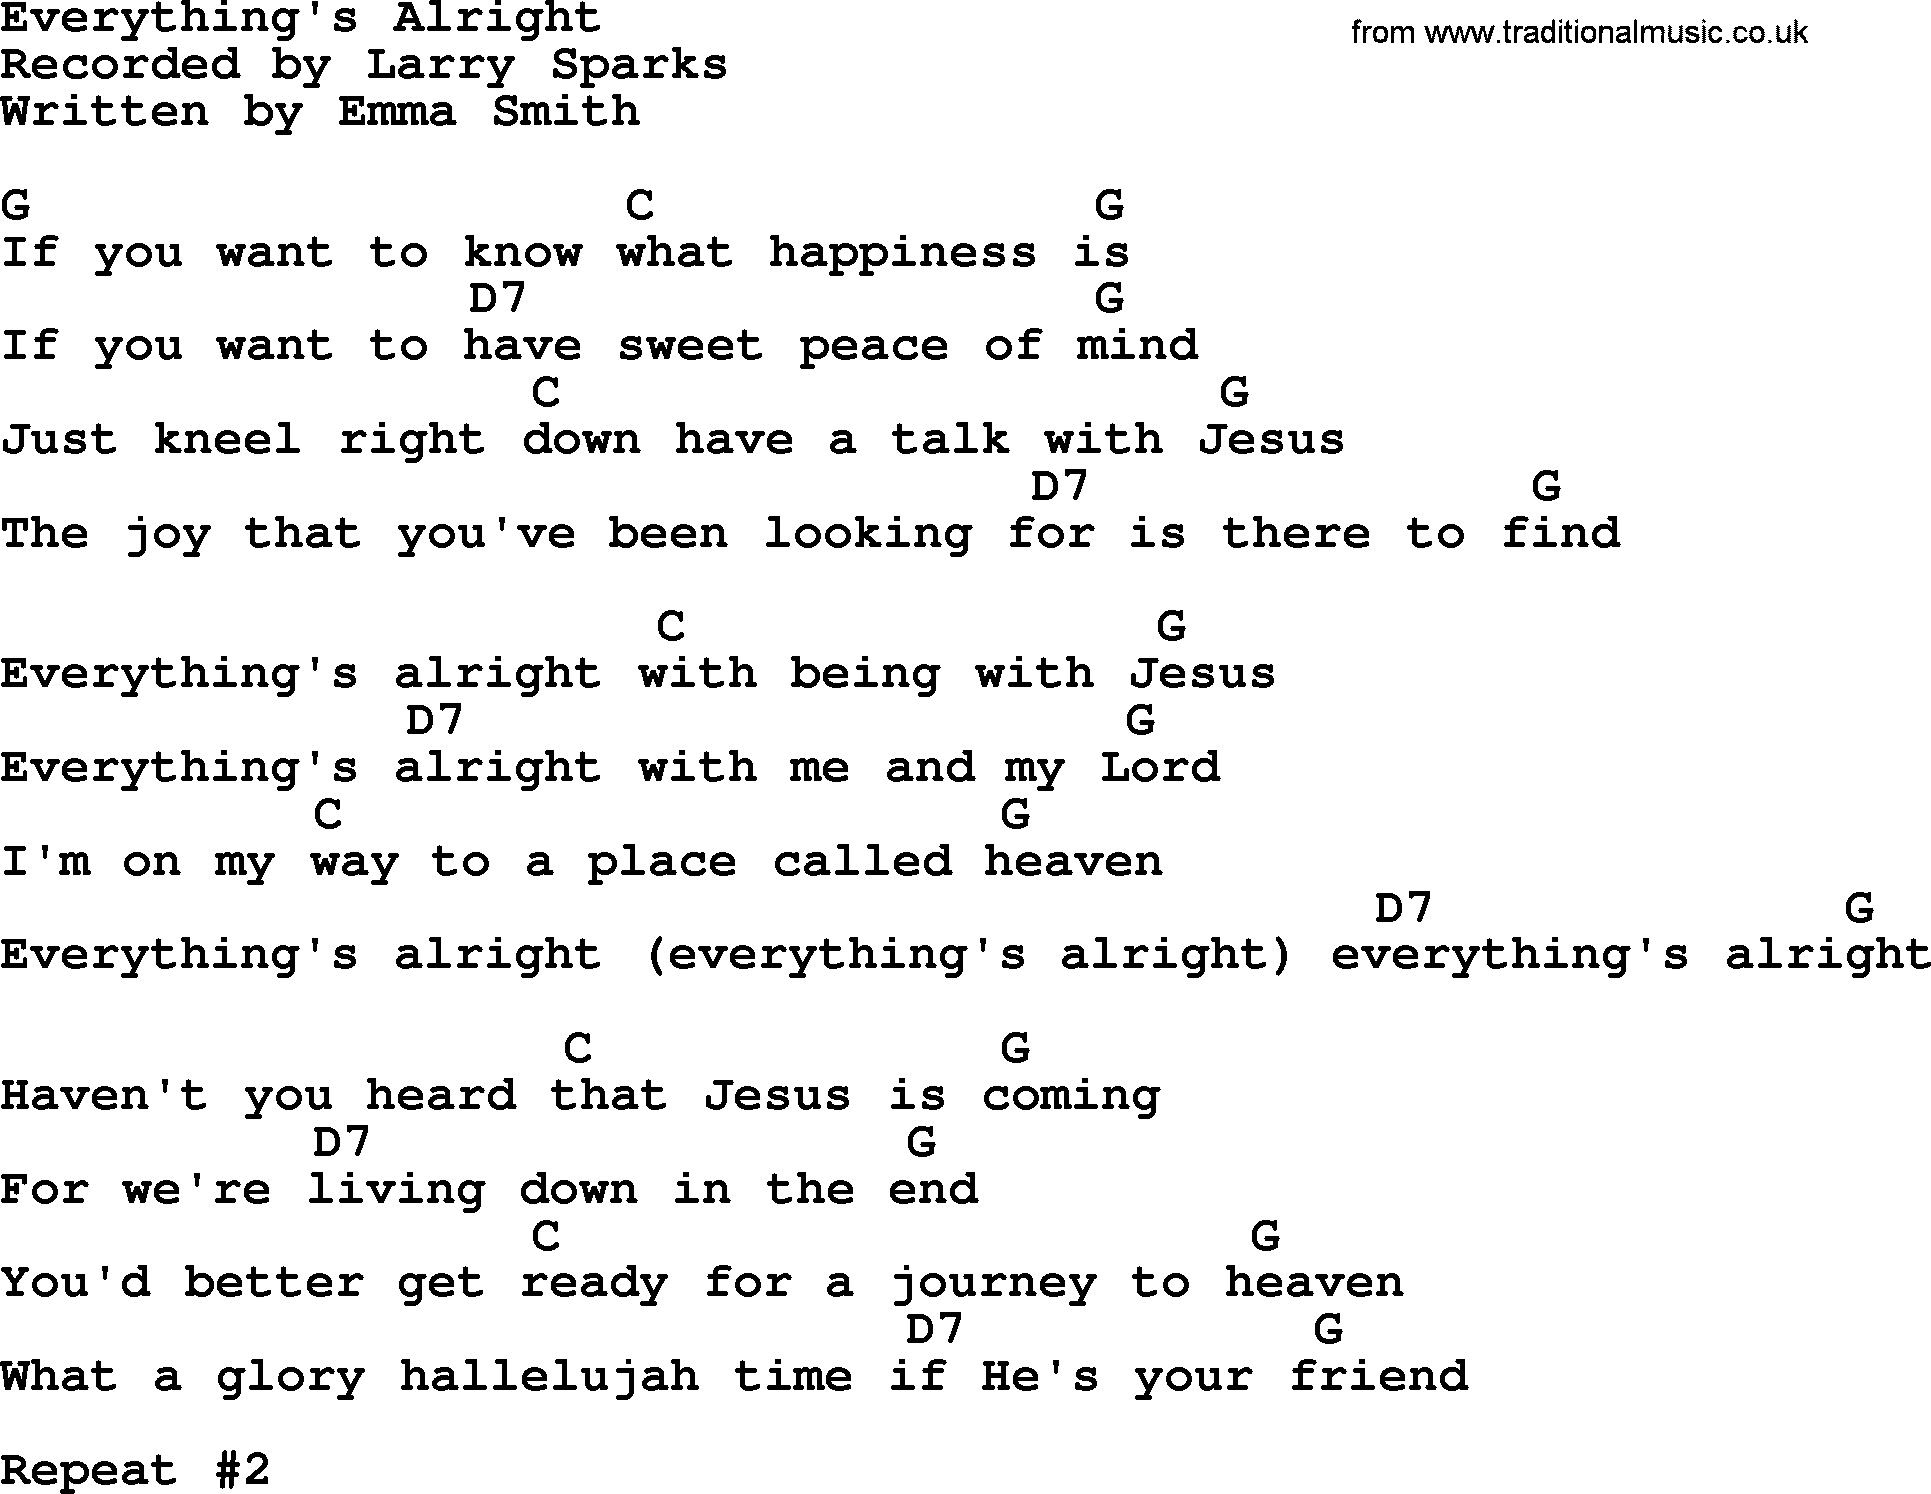 Bluegrass song: Everything's Alright, lyrics and chords